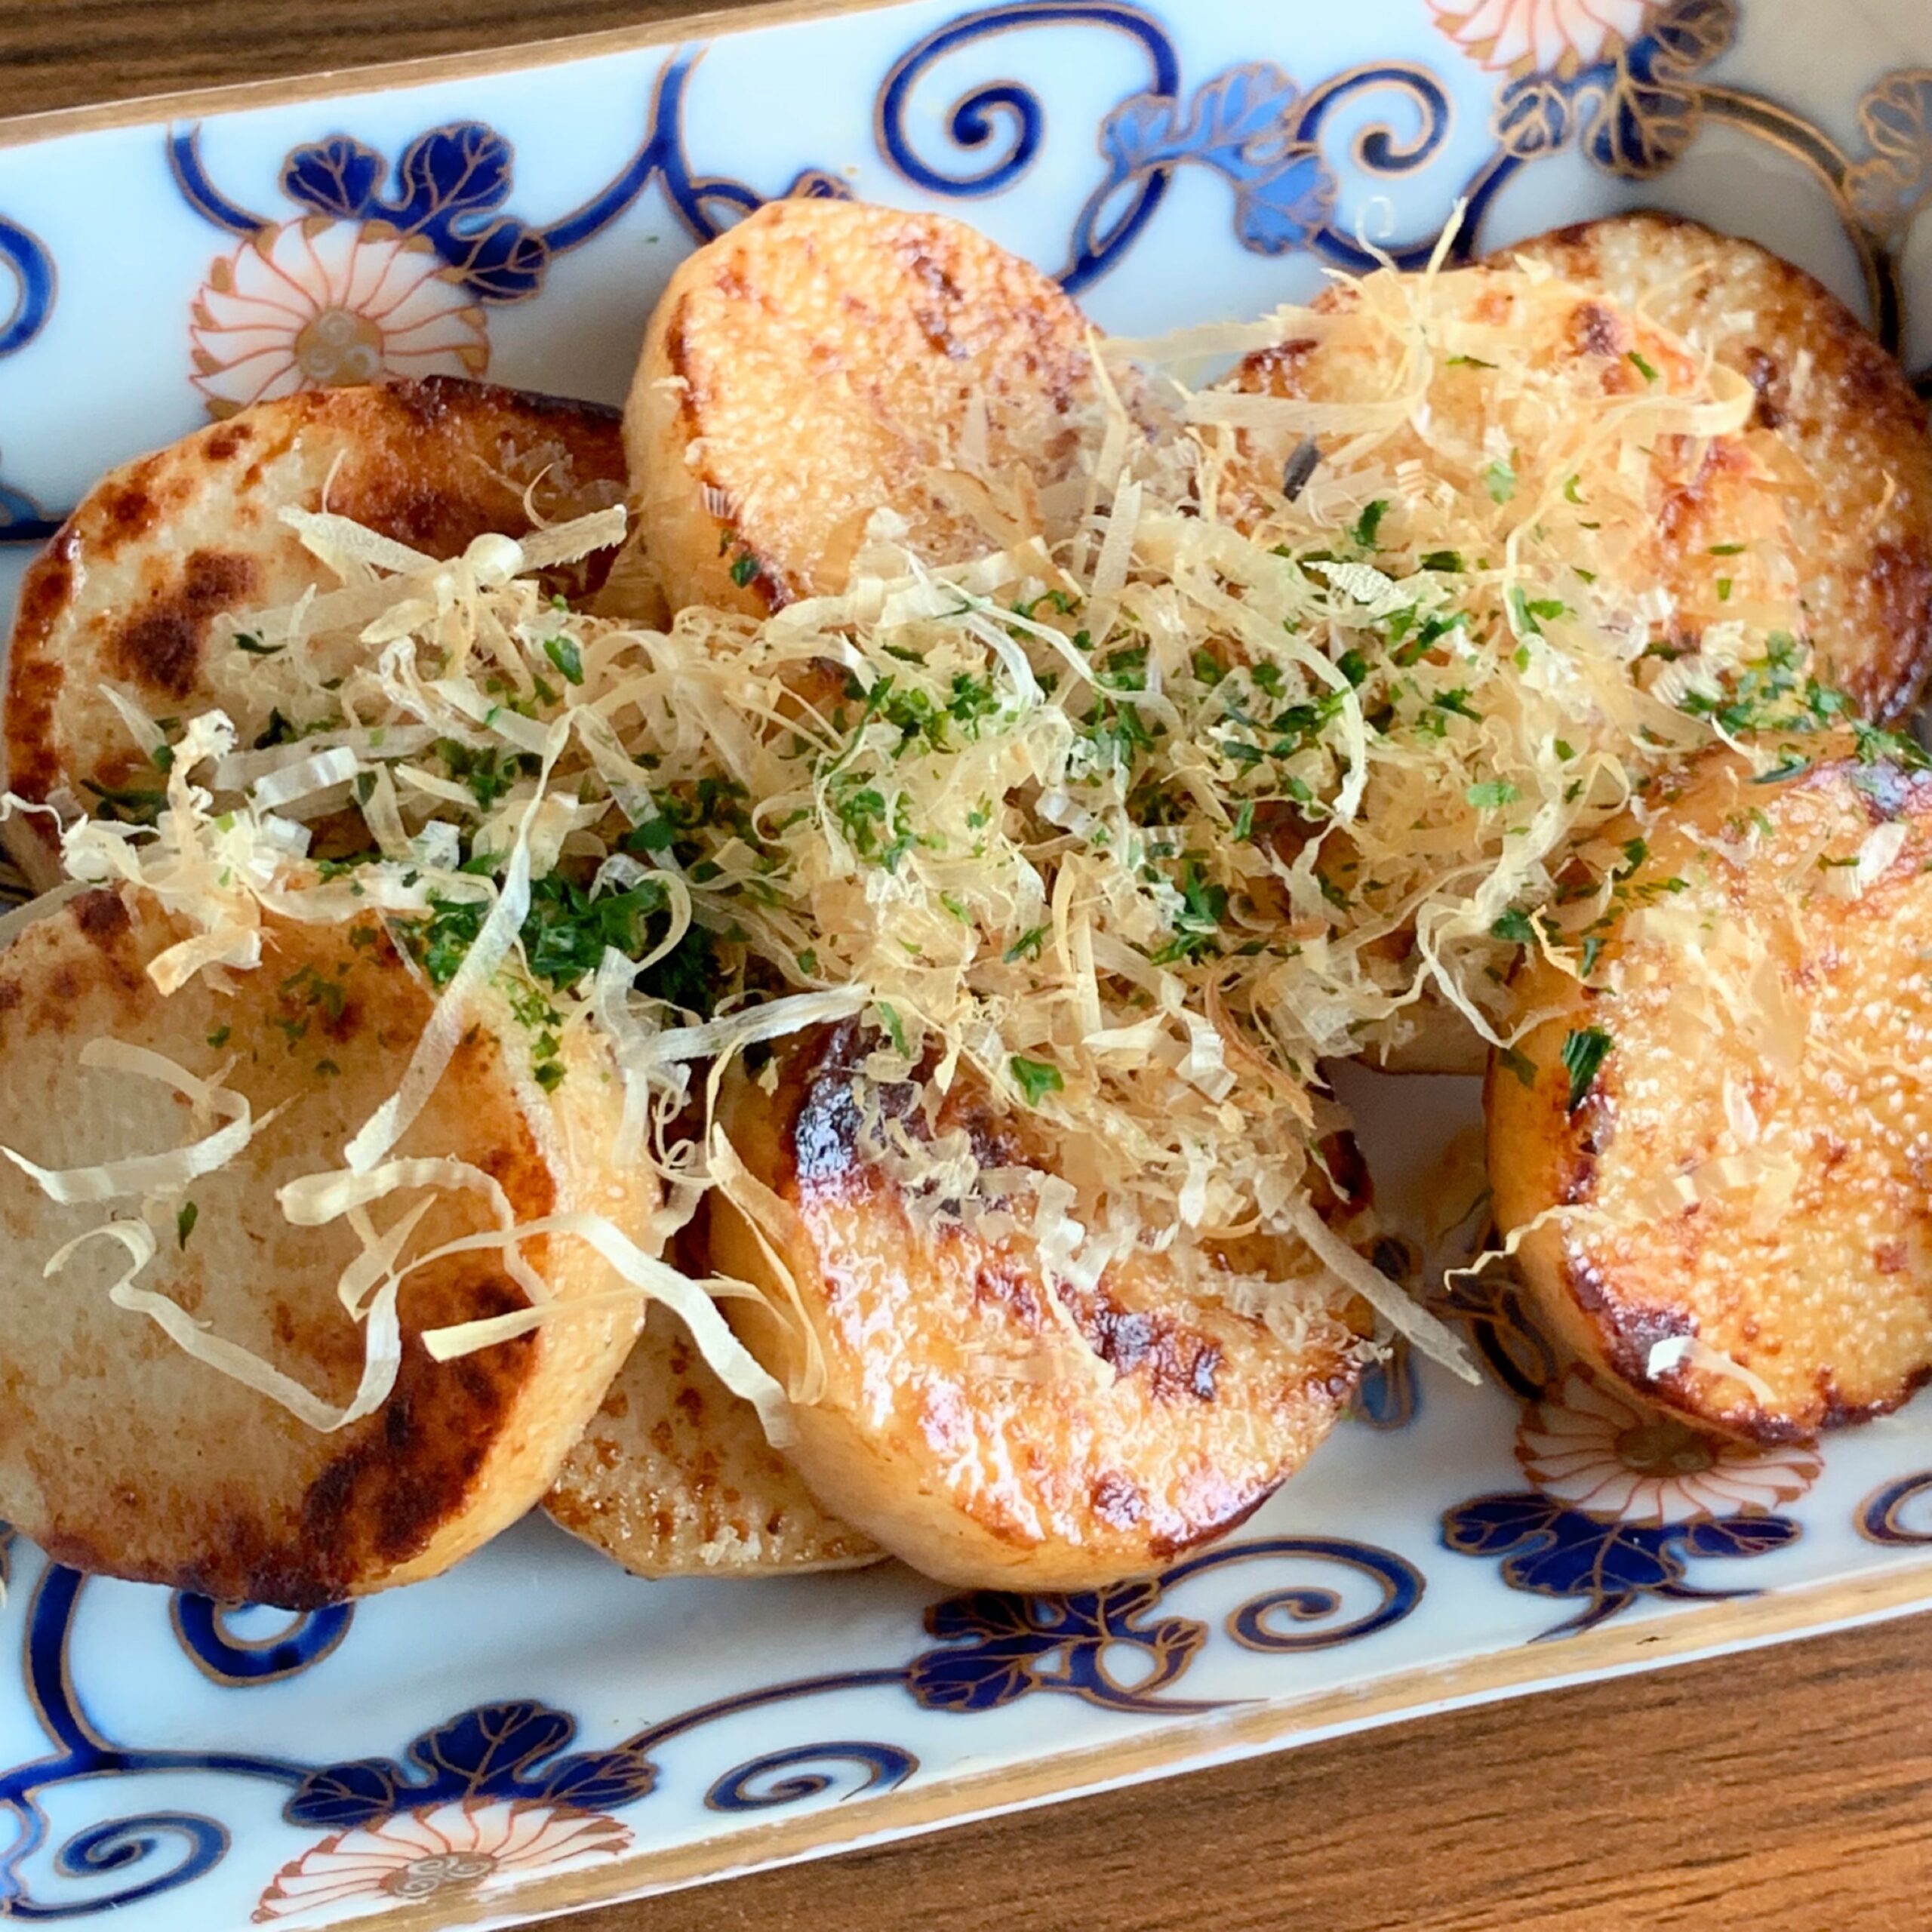 The butter-roasted yam is topped with soy sauce, bonito flakes, and green laver.